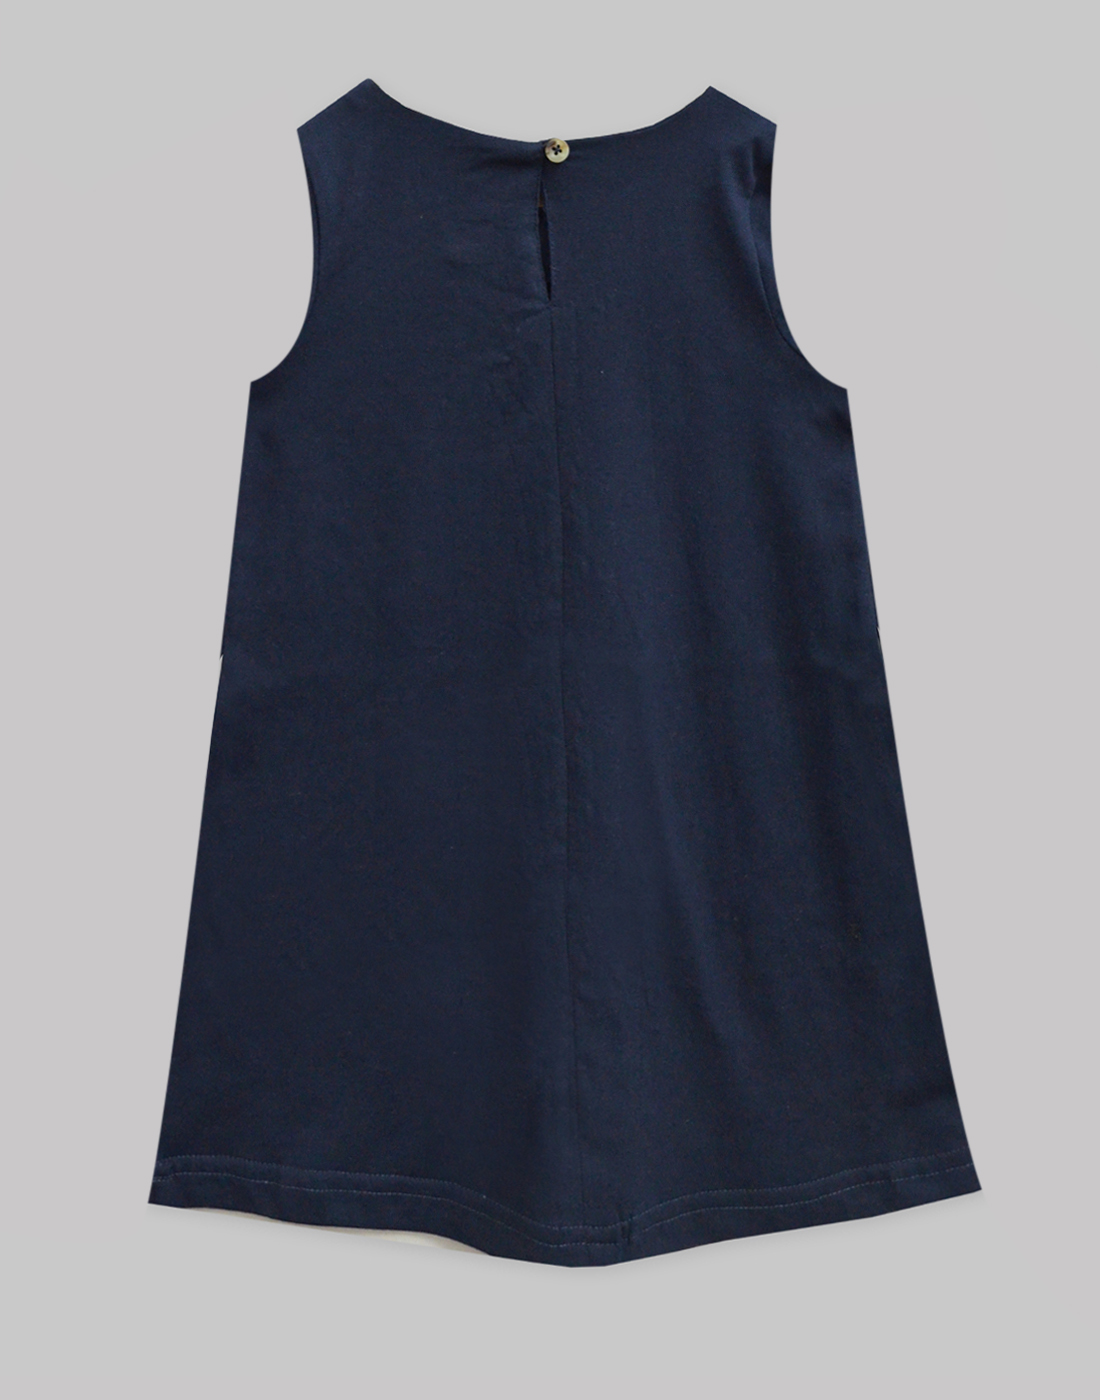 Navy with Red Bow Suzy Dress - A.T.U.N.